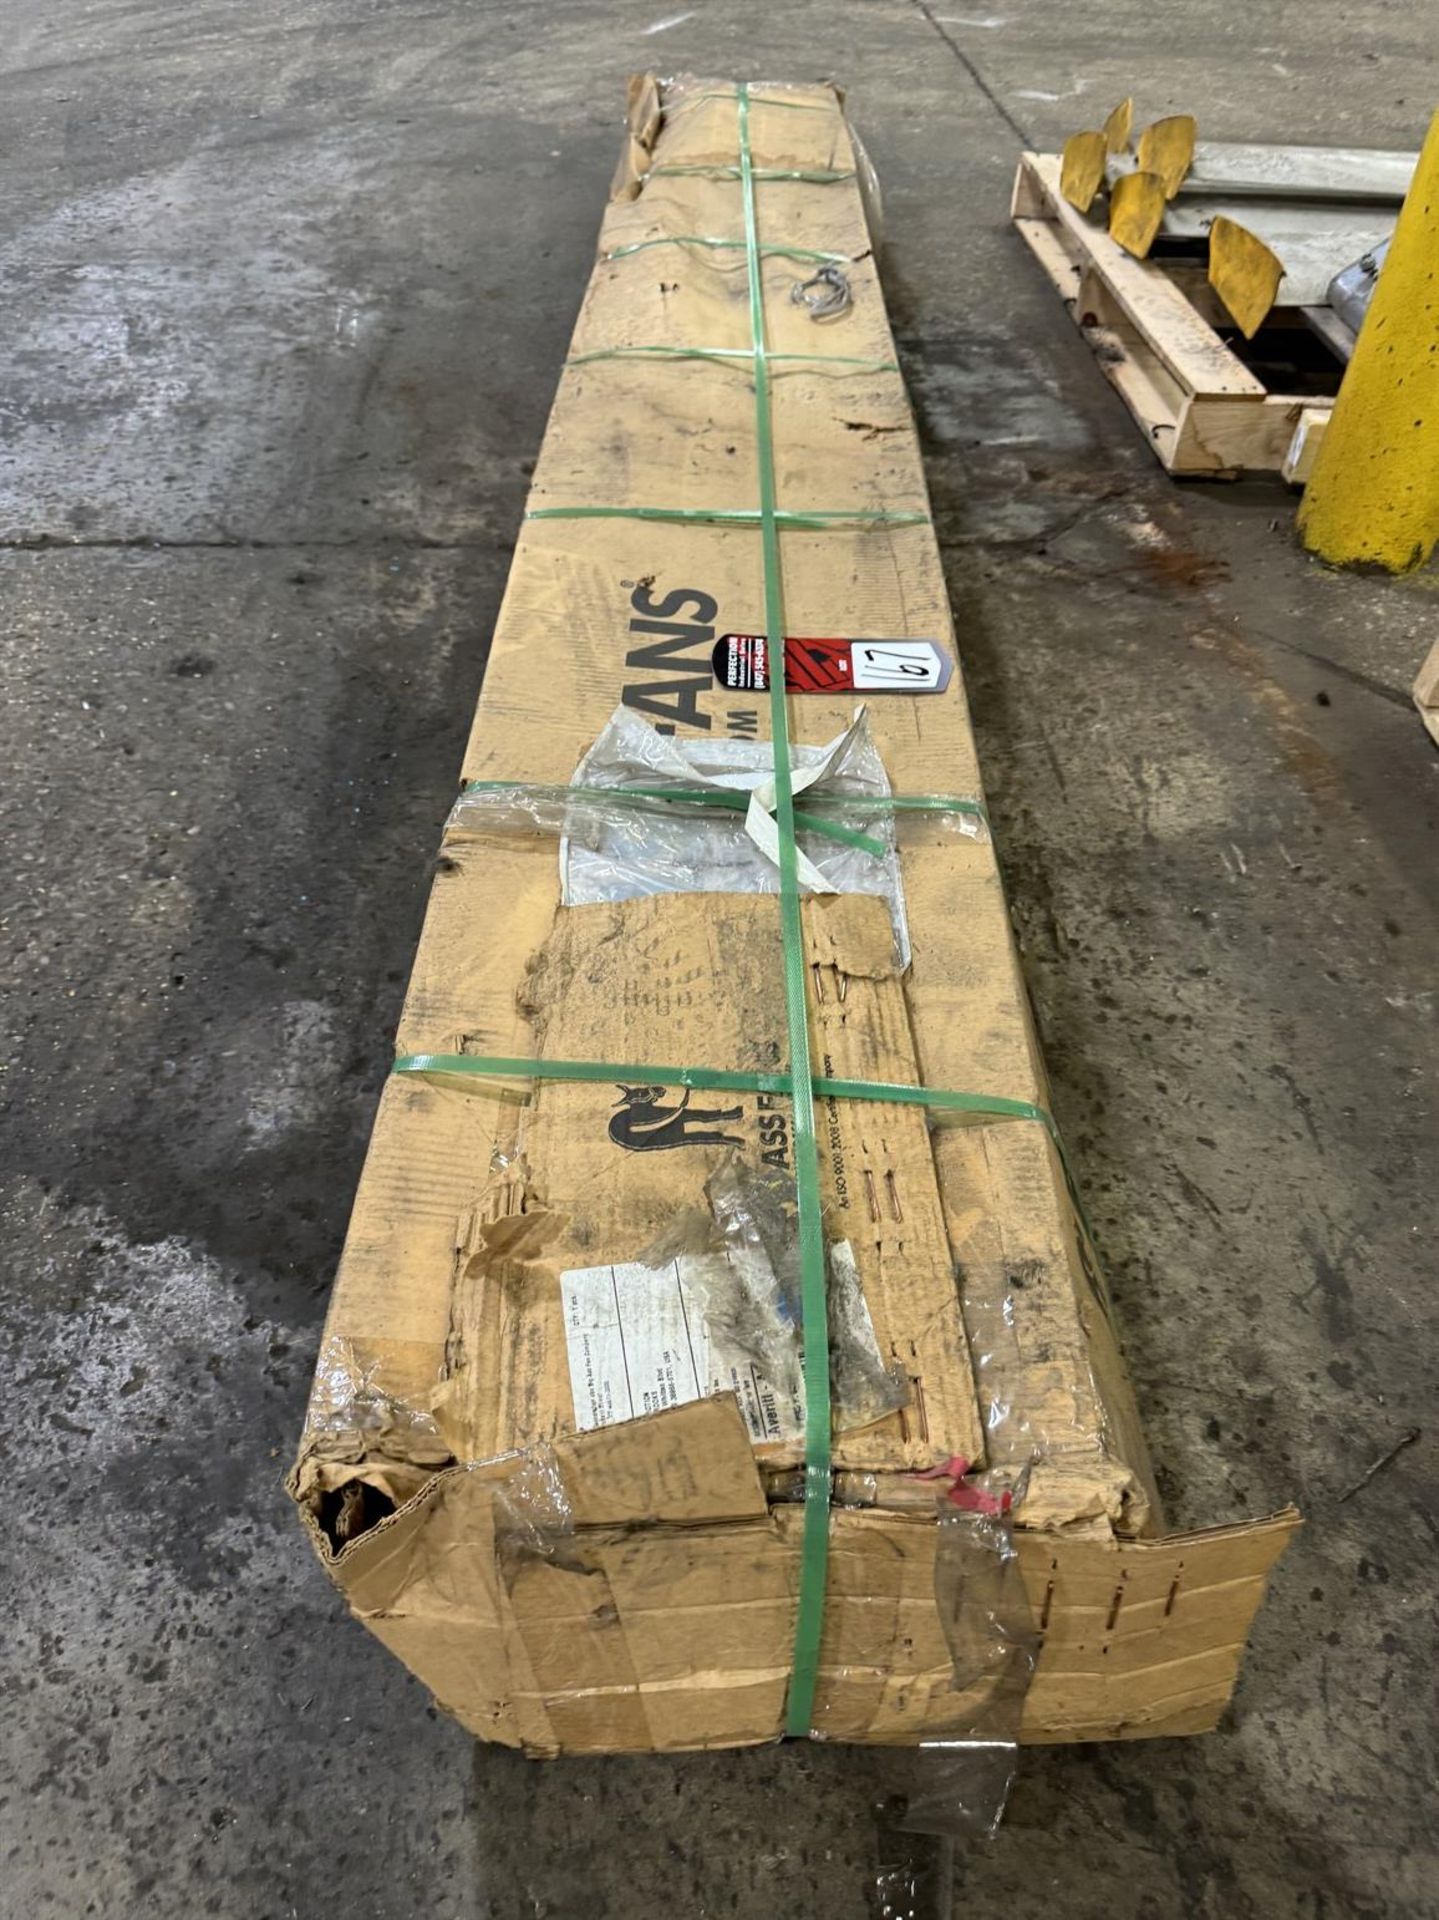 2015 BIG ASS FANS 18' HVLS Ceiling Fan (NEW IN BOX) - Image 2 of 3